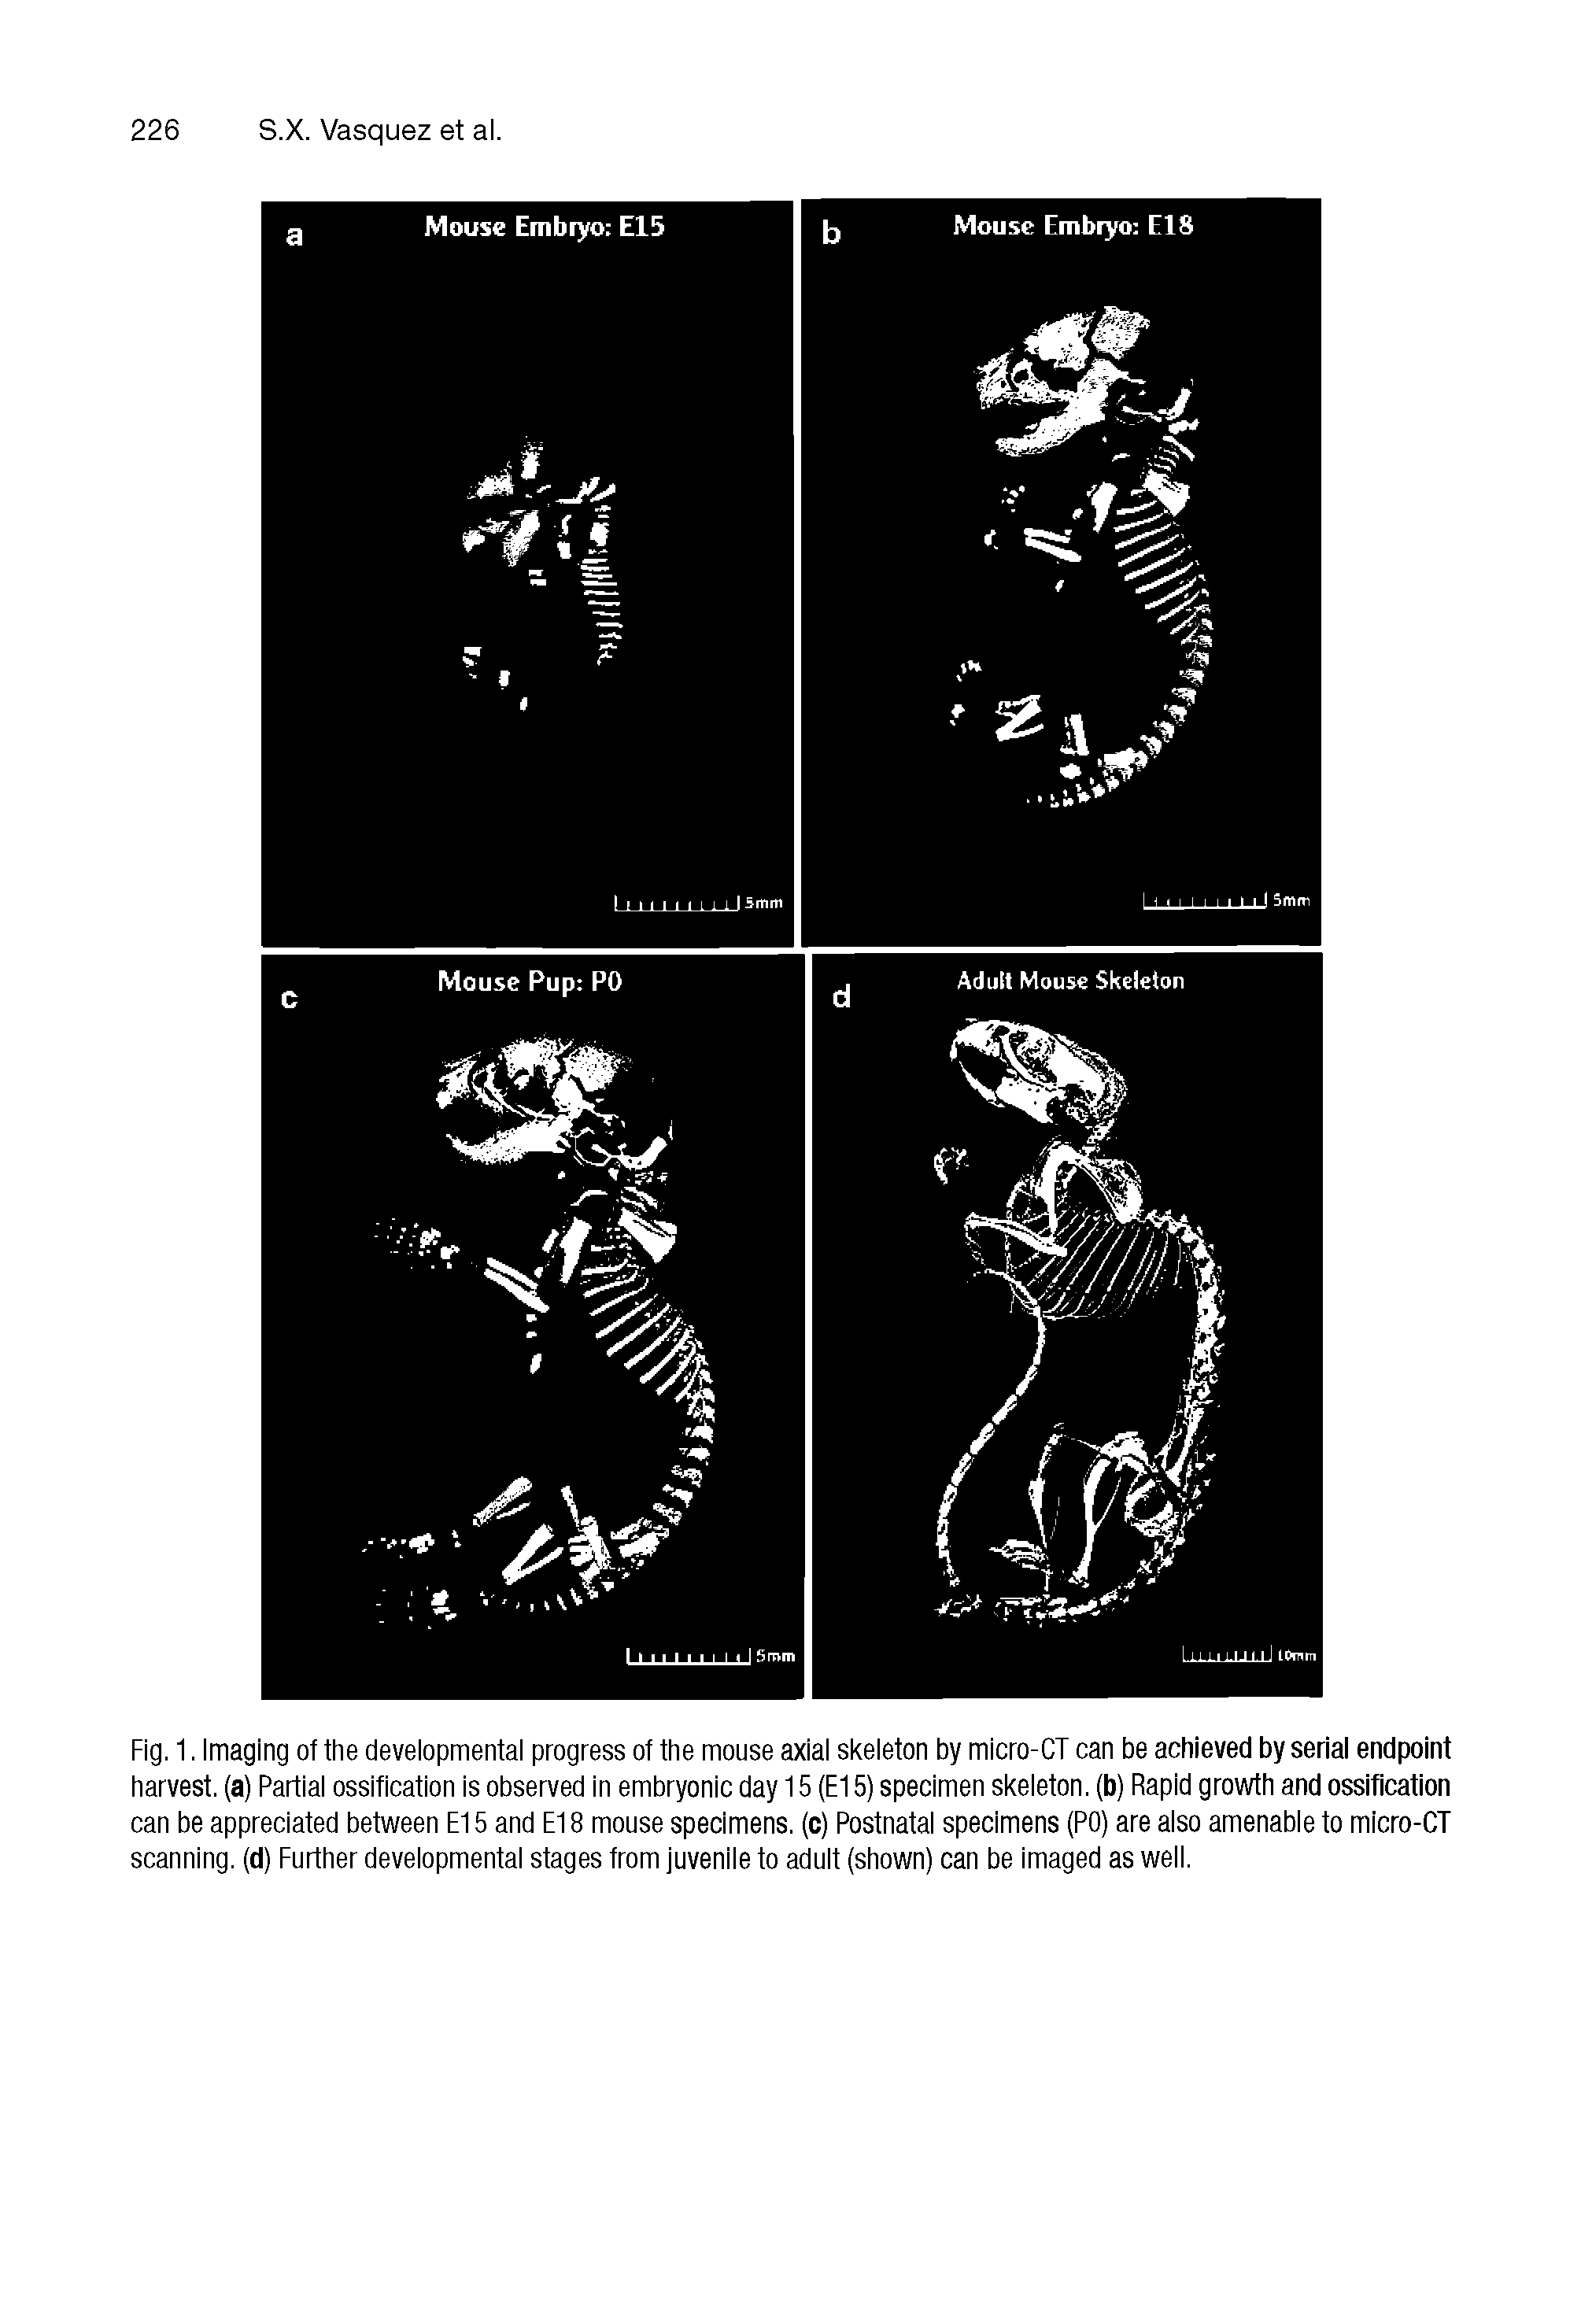 Fig. 1. Imaging of the developmental progress of the mouse axial skeleton by micro-CT can be achieved by serial endpoint harvest, (a) Partial ossification is observed in embryonic day 15 (El 5) specimen skeleton, (b) Rapid growth and ossification can be appreciated between E15 and Et 8 mouse specimens, (c) Postnatal specimens (PO) are also amenable to micro-CT scanning, (d) Eurther developmental stages from juvenile to adult (shown) can be imaged as well.